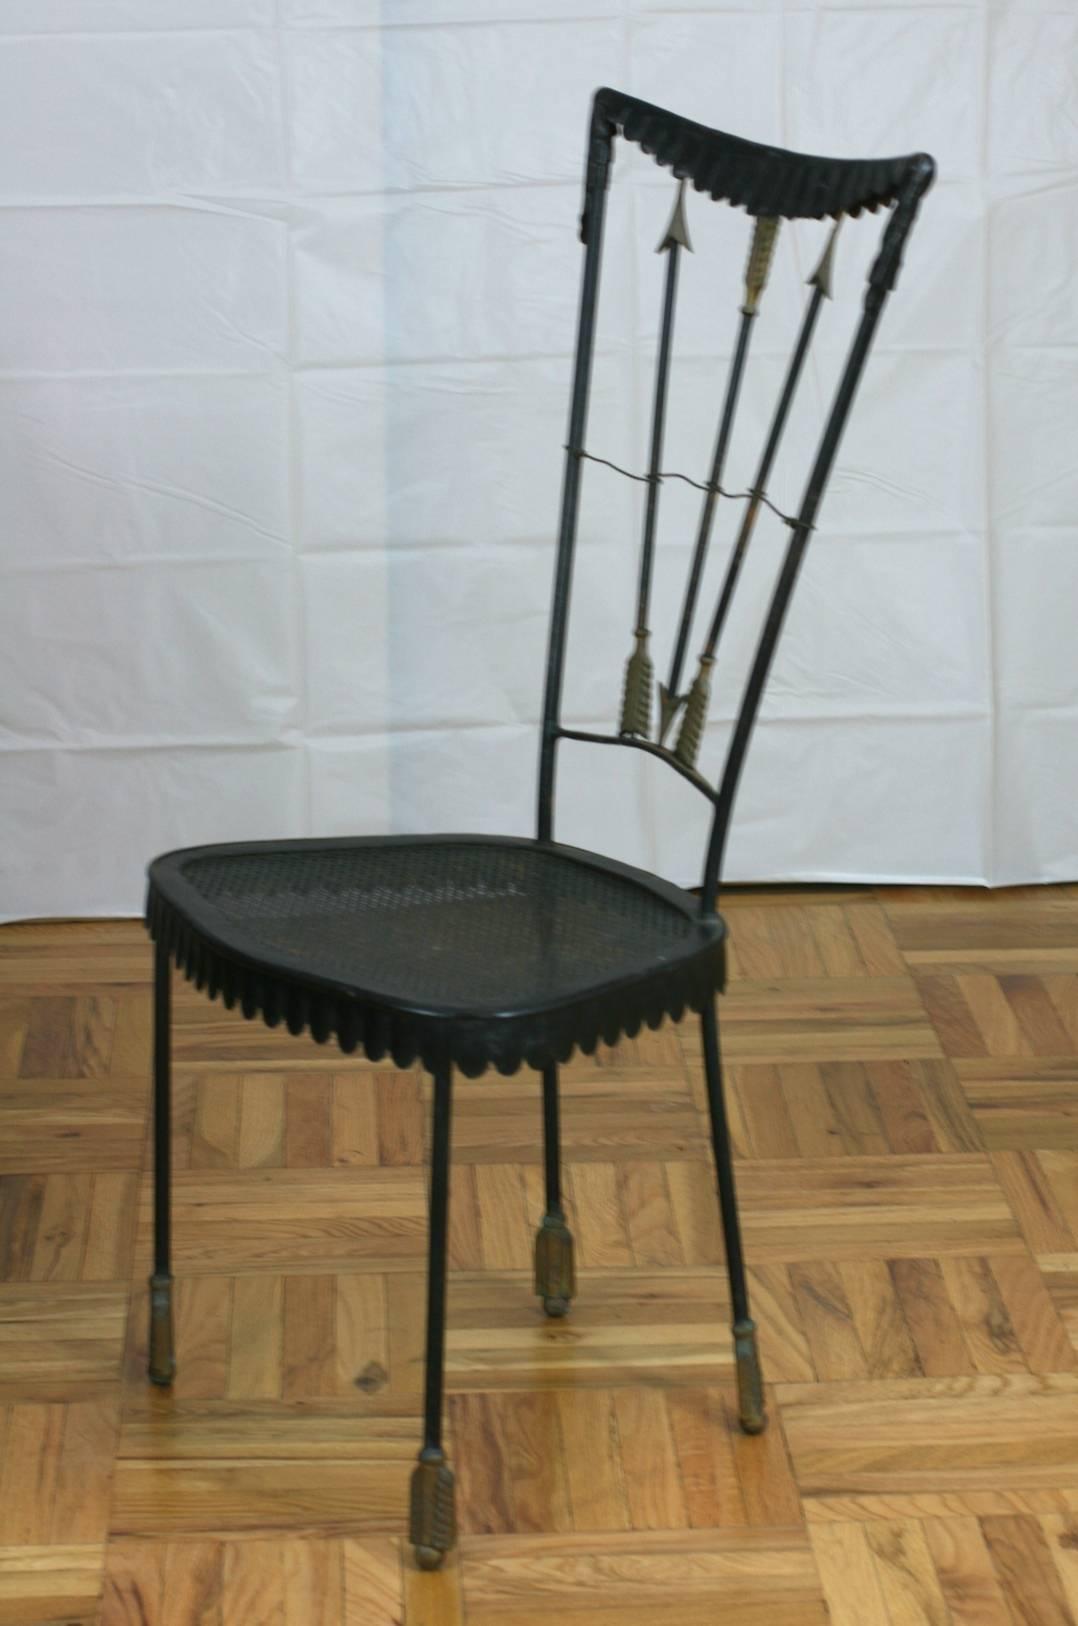 Surrealist iron garden chair with arrow motifs by Tomaso Buzzi. Brass arrow points and feather motifs contrast with the blackened iron. Draped metal 